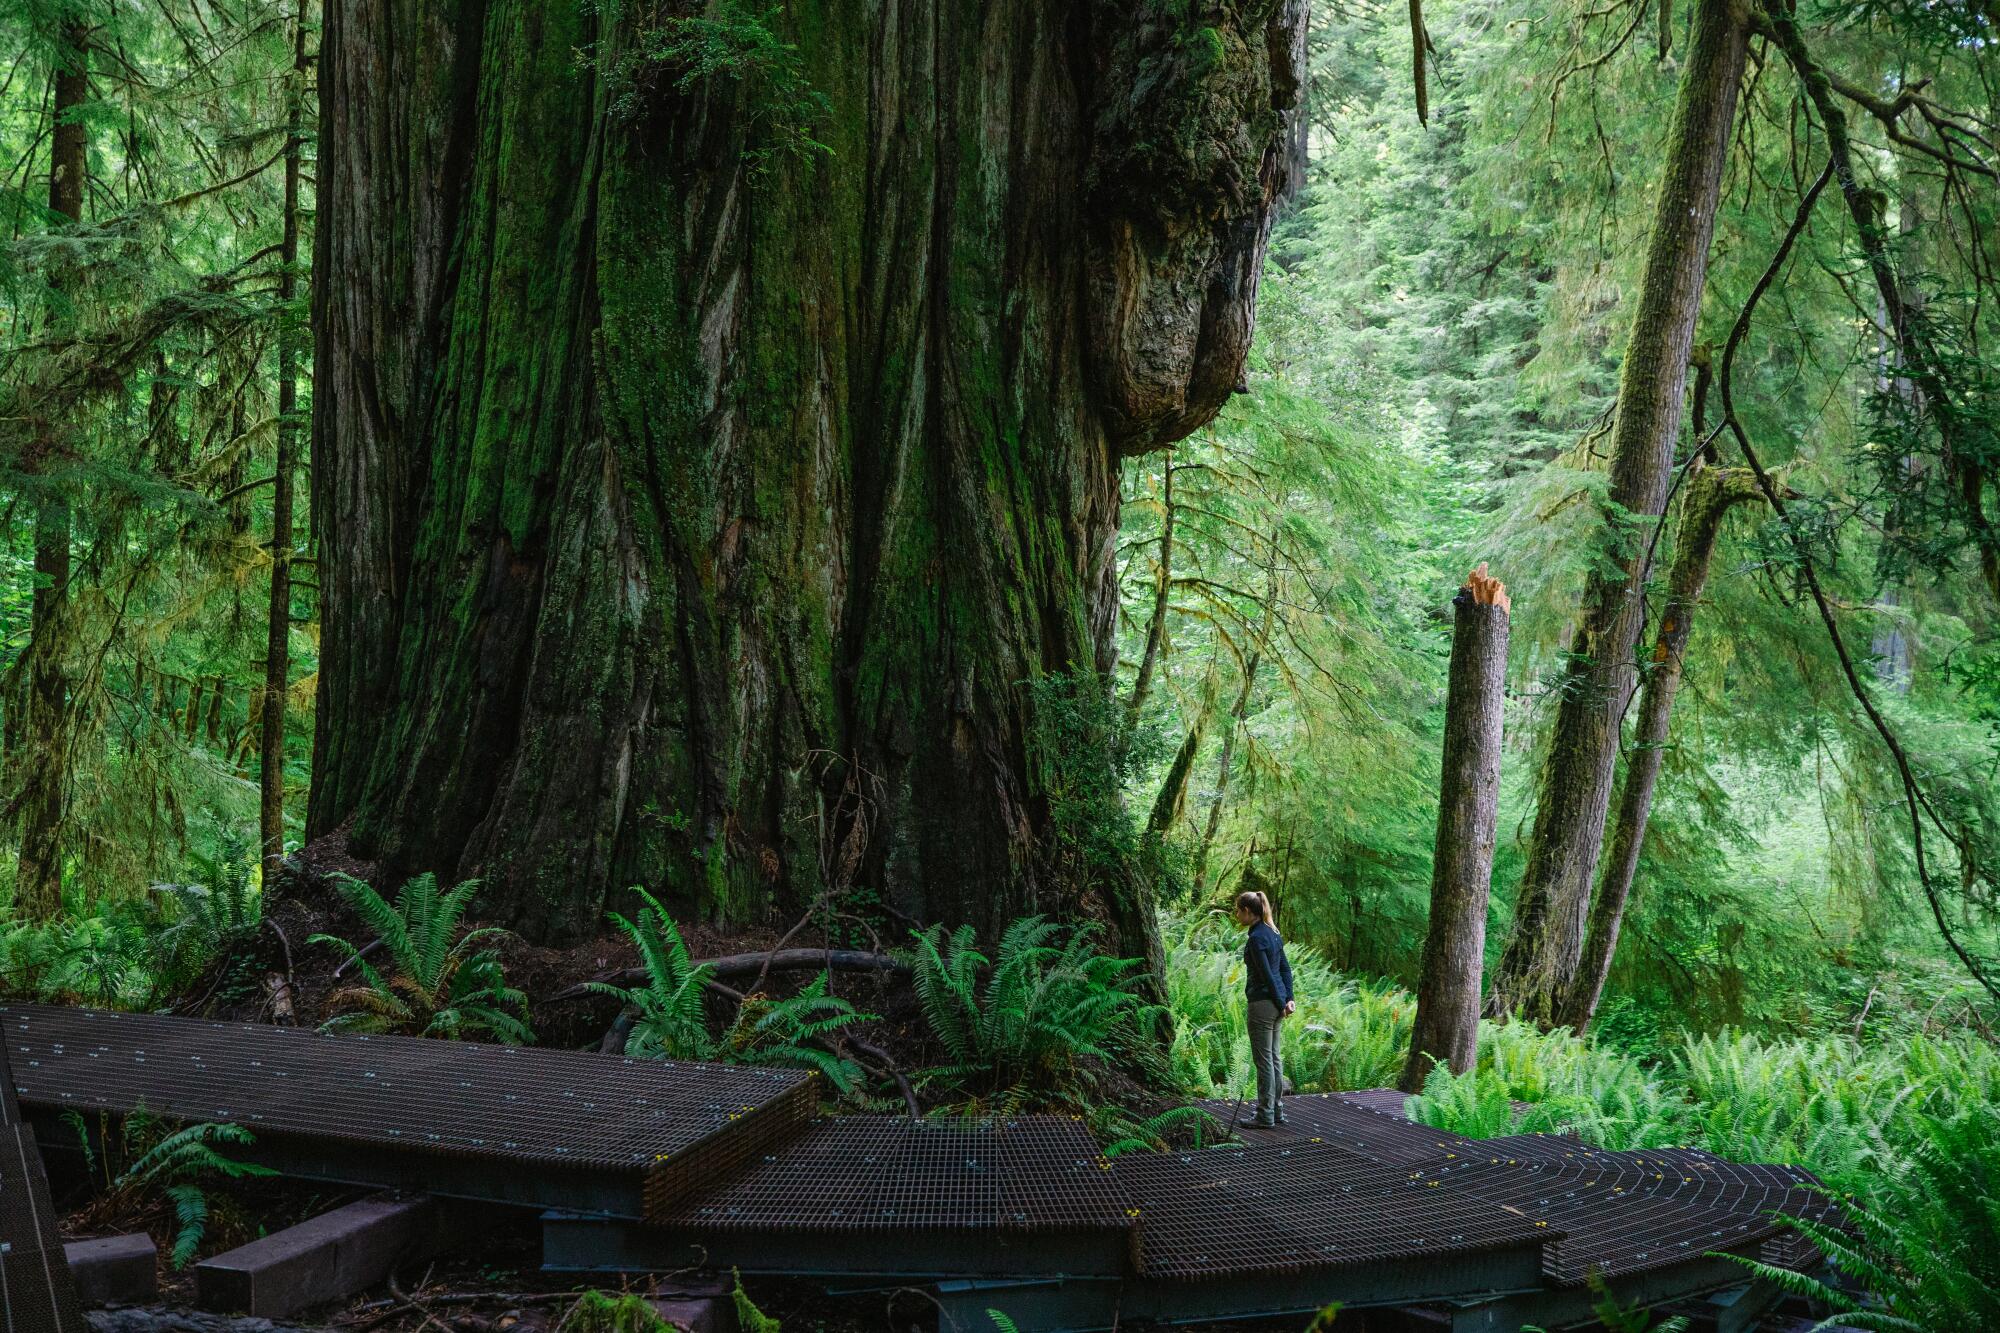 A person looks tiny standing next to a giant redwood in a forest.